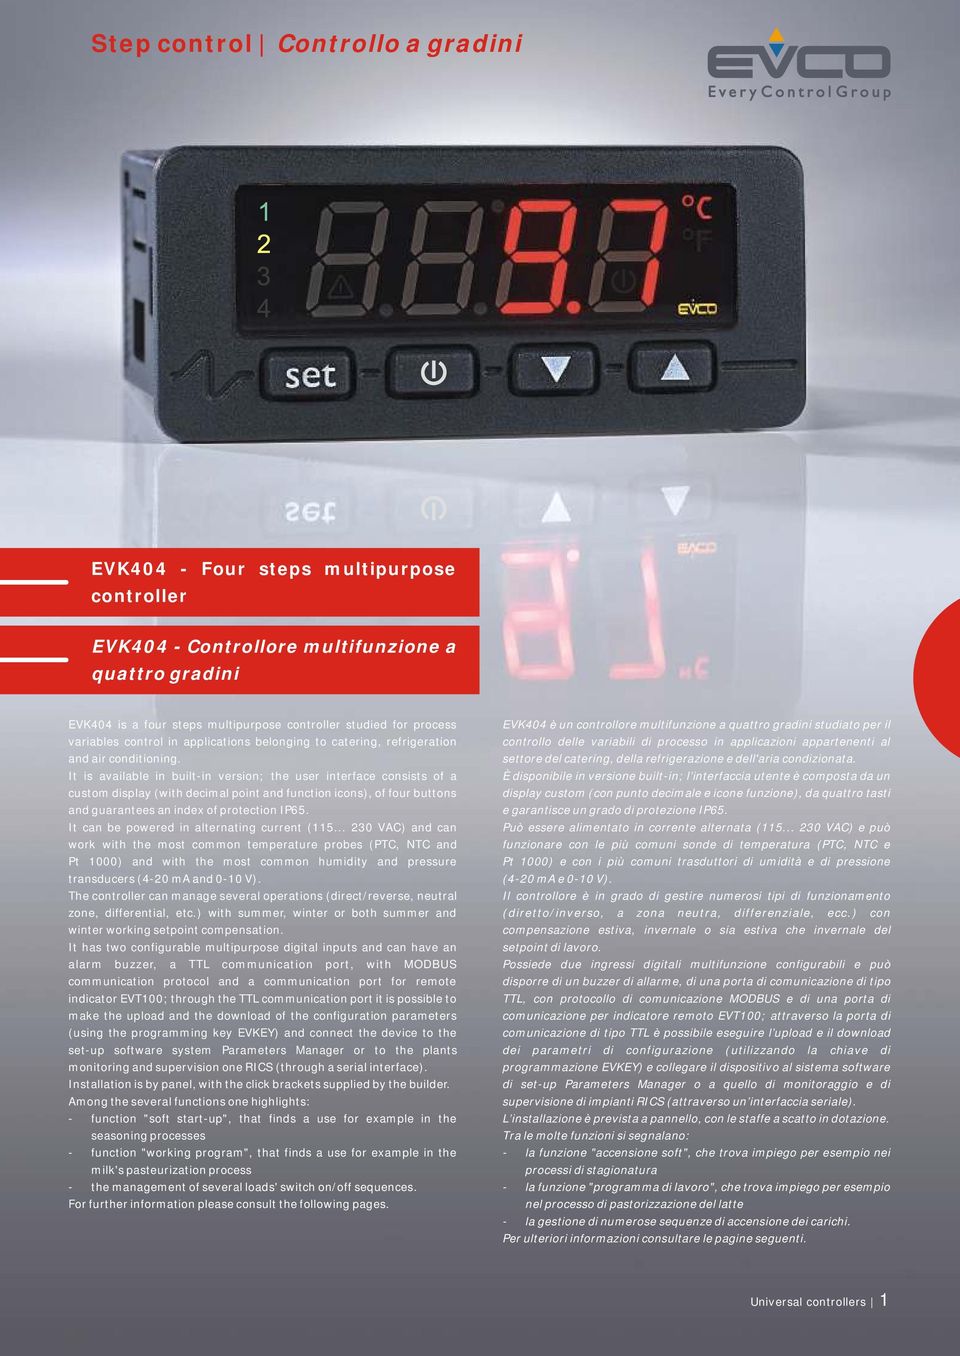 It is available in built-in versi; the user interface csists of a custom display (with decimal point and functi ics), of four butts and guarantees an index of protecti IP65.